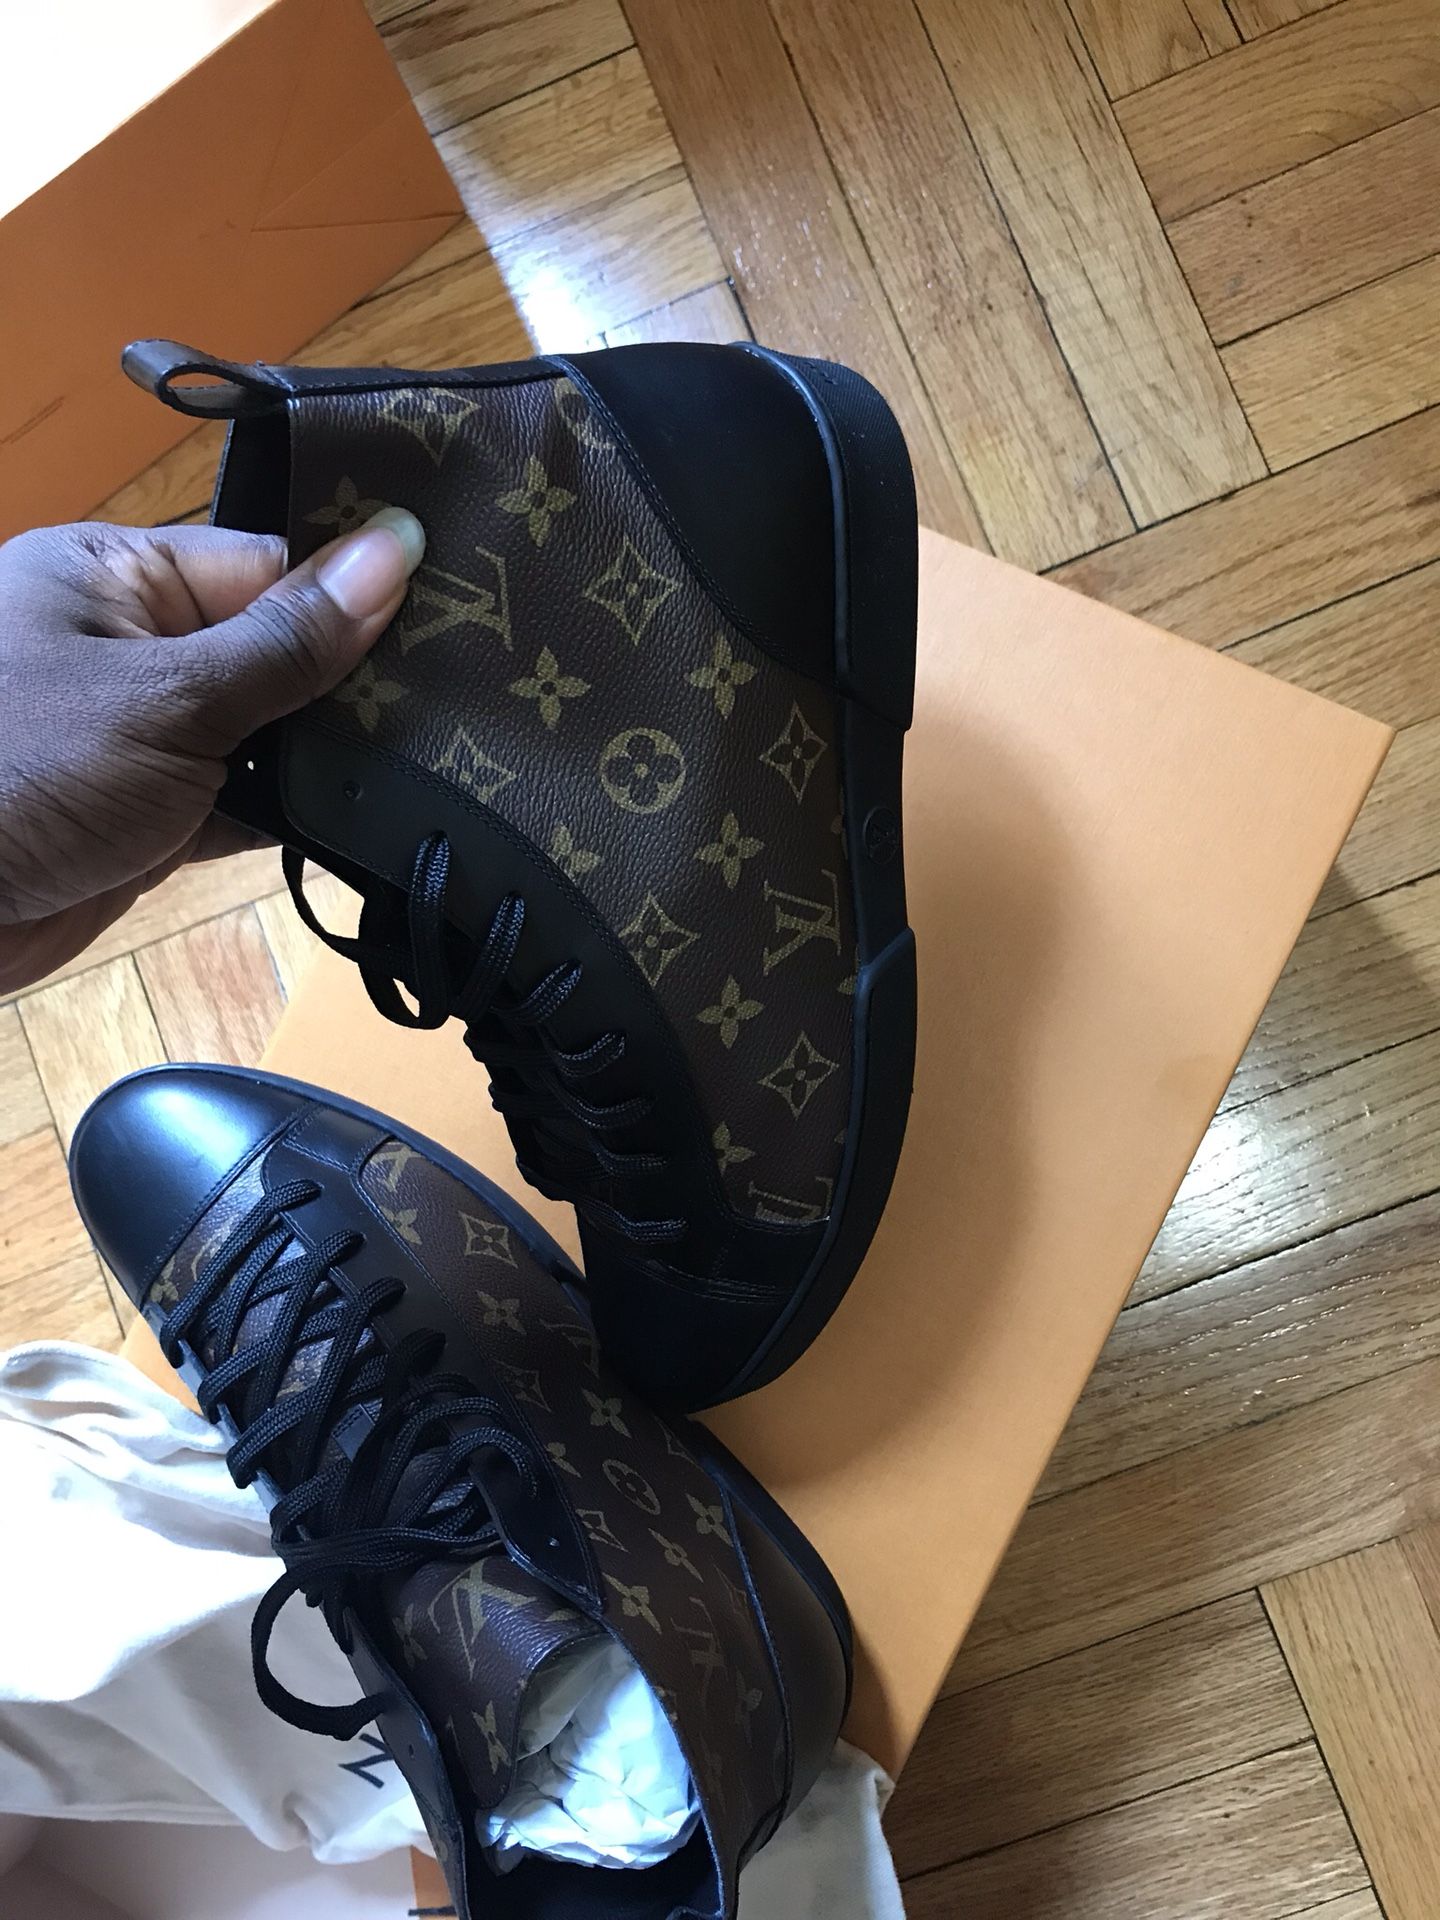 Louis Vuitton Squad Sneaker Boot for Sale in New York, NY - OfferUp